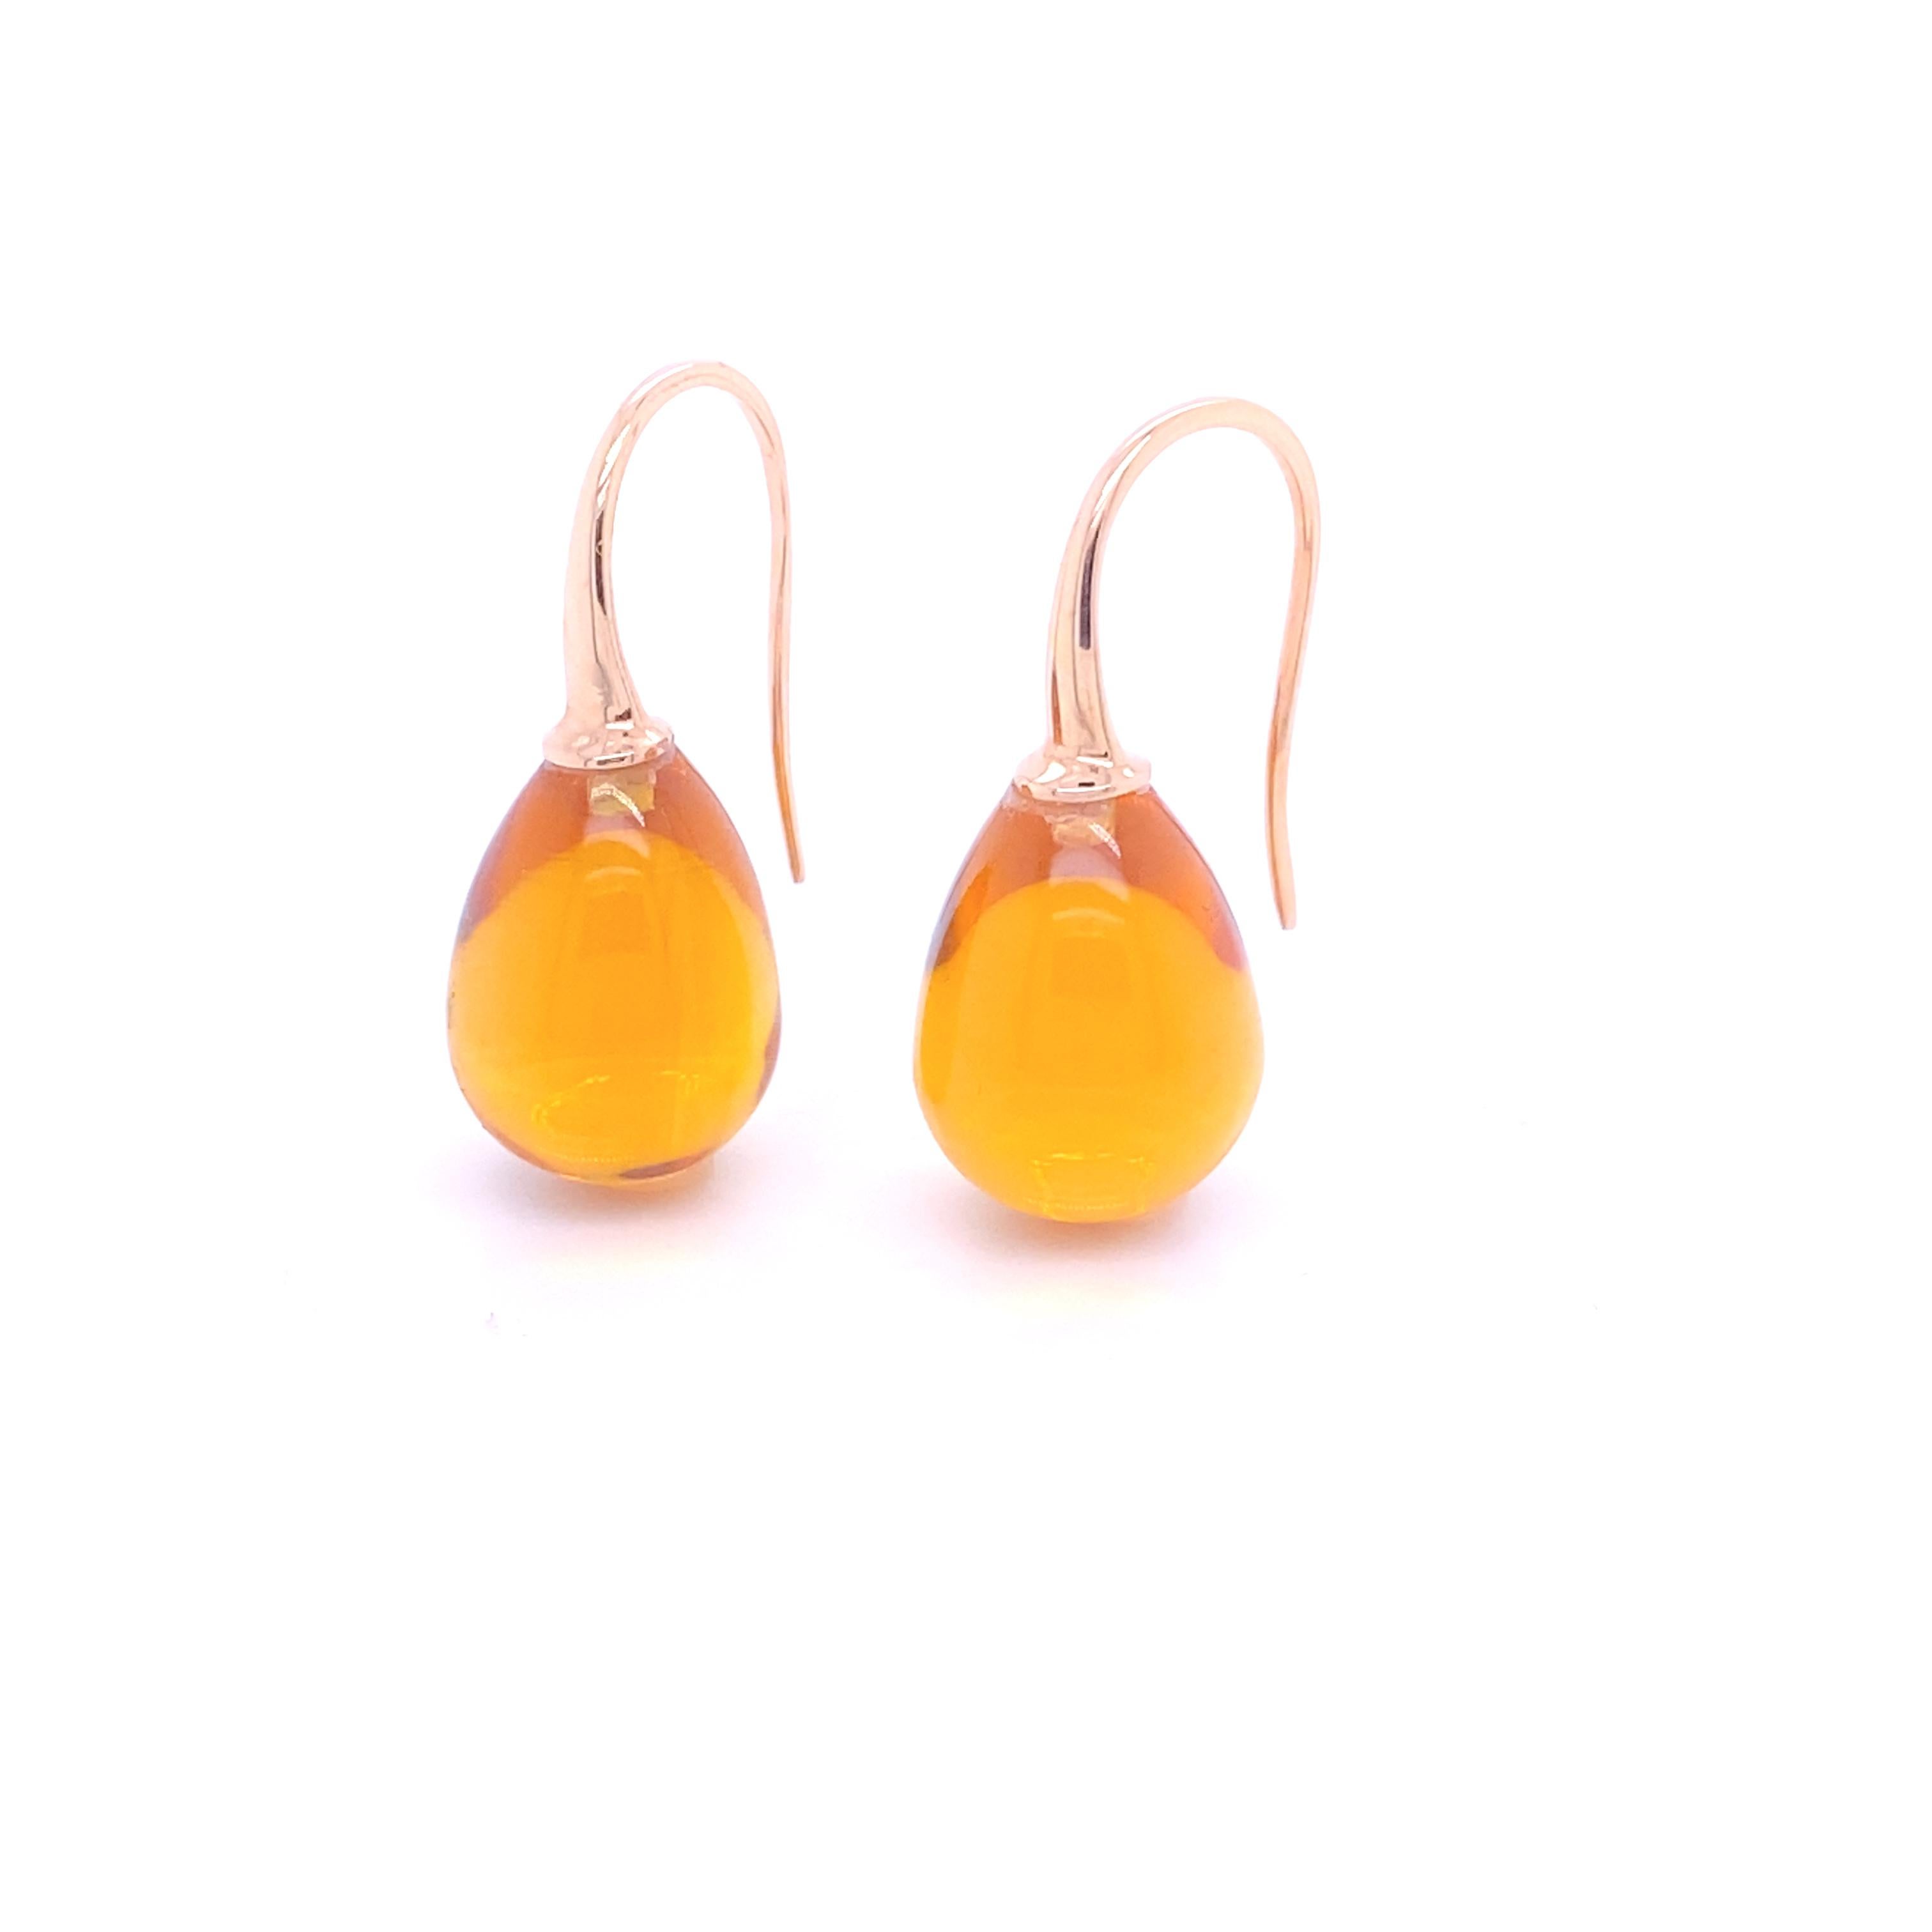 Discovers This Hydro Citrine With Yellow Gold 
French Collection by Mesure et Art du Temps.

The benefits of yellow citrine would be thanks to its positive energies and its warm color, citrine could soothe and invigorate the body and the mind. It